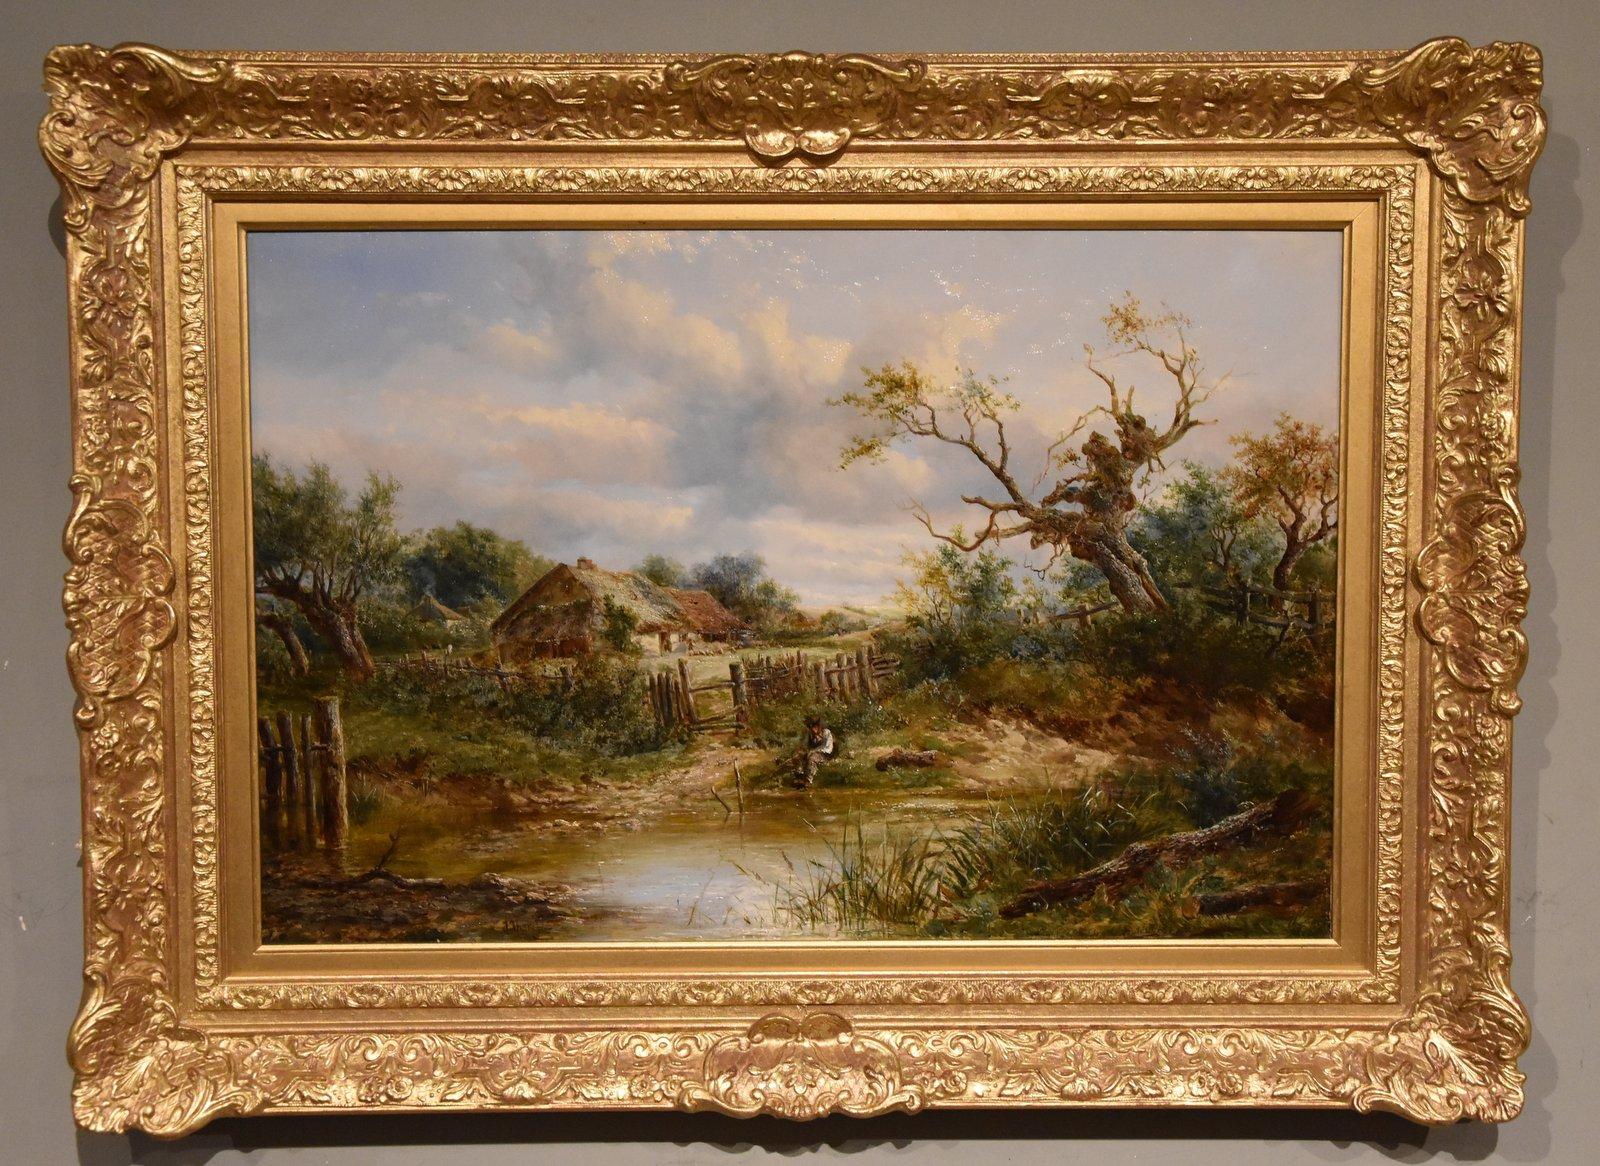 Oil Painting by Joseph Thors "A Quiet Day by The River" 1843 -1907 Popular painter of rural landscapes in the manner of the Norwich school. Regular exhibitor at the Royal Academy society and British Institute. Oil on canvas. Signed and dated 1863.